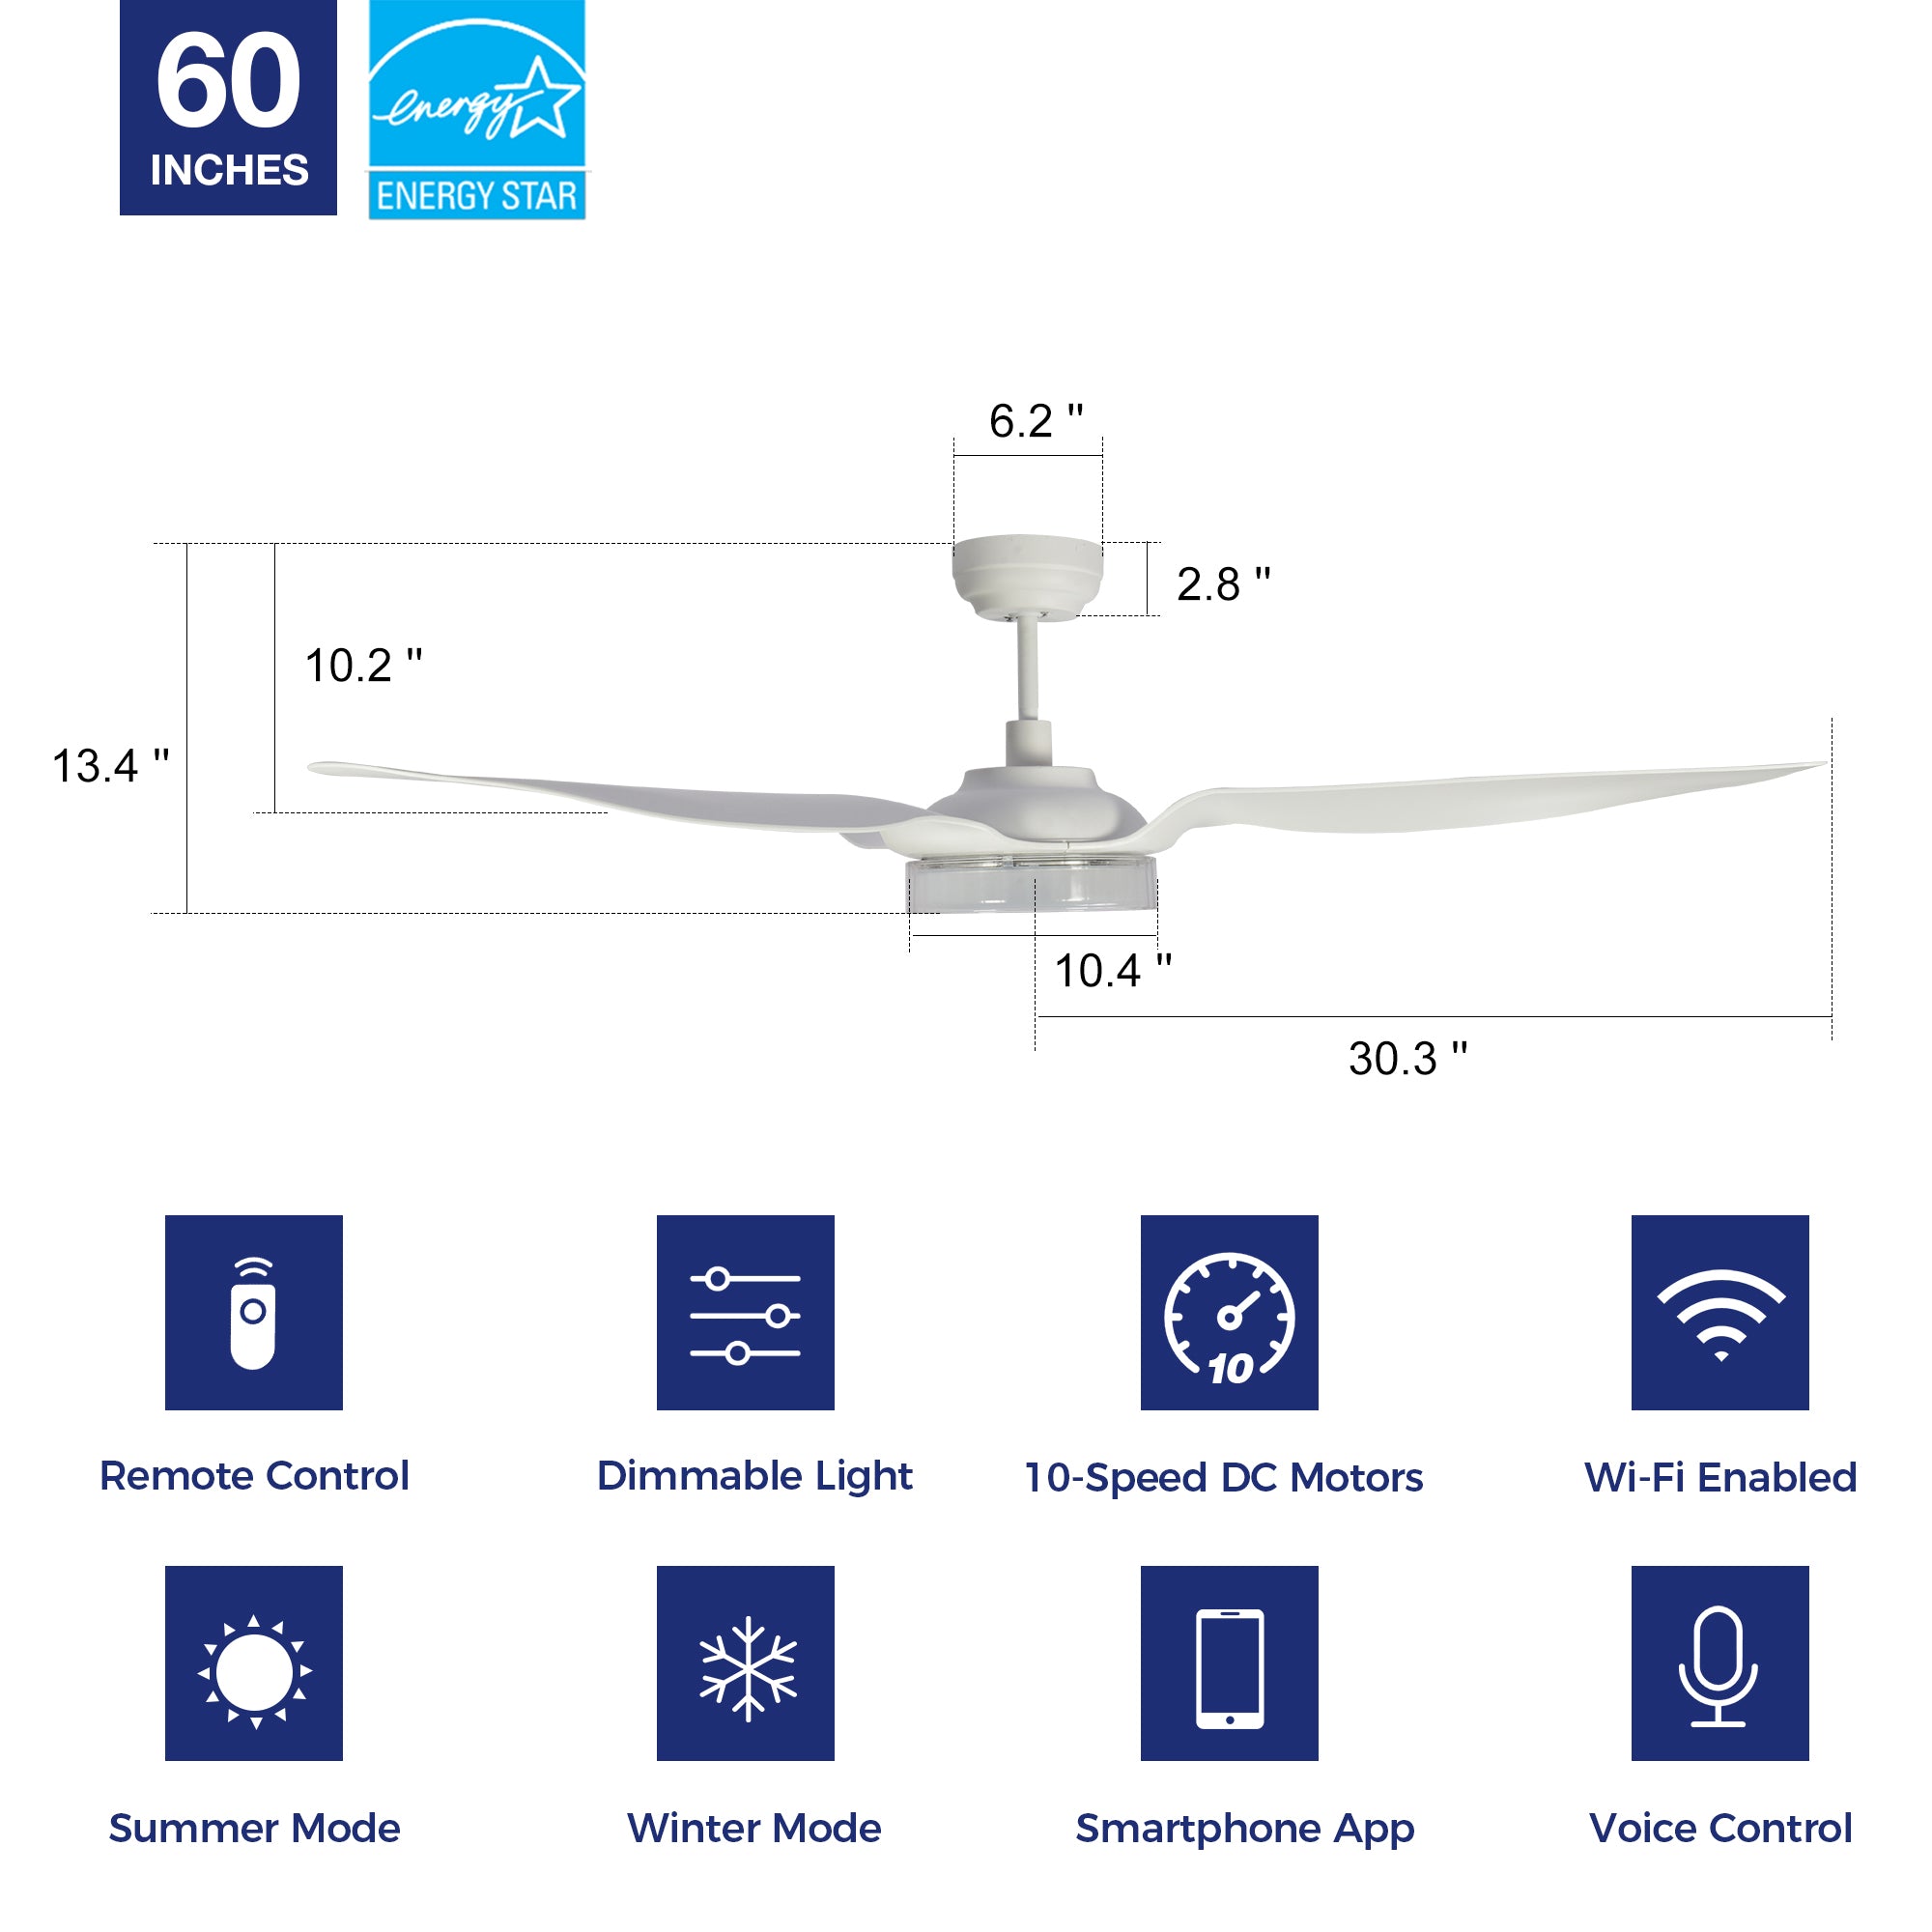 Icebreaker Outdoor 60-inch Smart Ceiling Fan with LED Light Kit-white Case and white Abs Fan Blades. The fan features Remote control, Wi-Fi apps, and Voice control technology (compatible with Amazon Alexa and Google Home Assistant ) to set fan preferences. Equipped with 3000-lumen dimmable LED lights and a 10-speed DC Motor (7000CFM airflow output), it brings you cool and bright. 